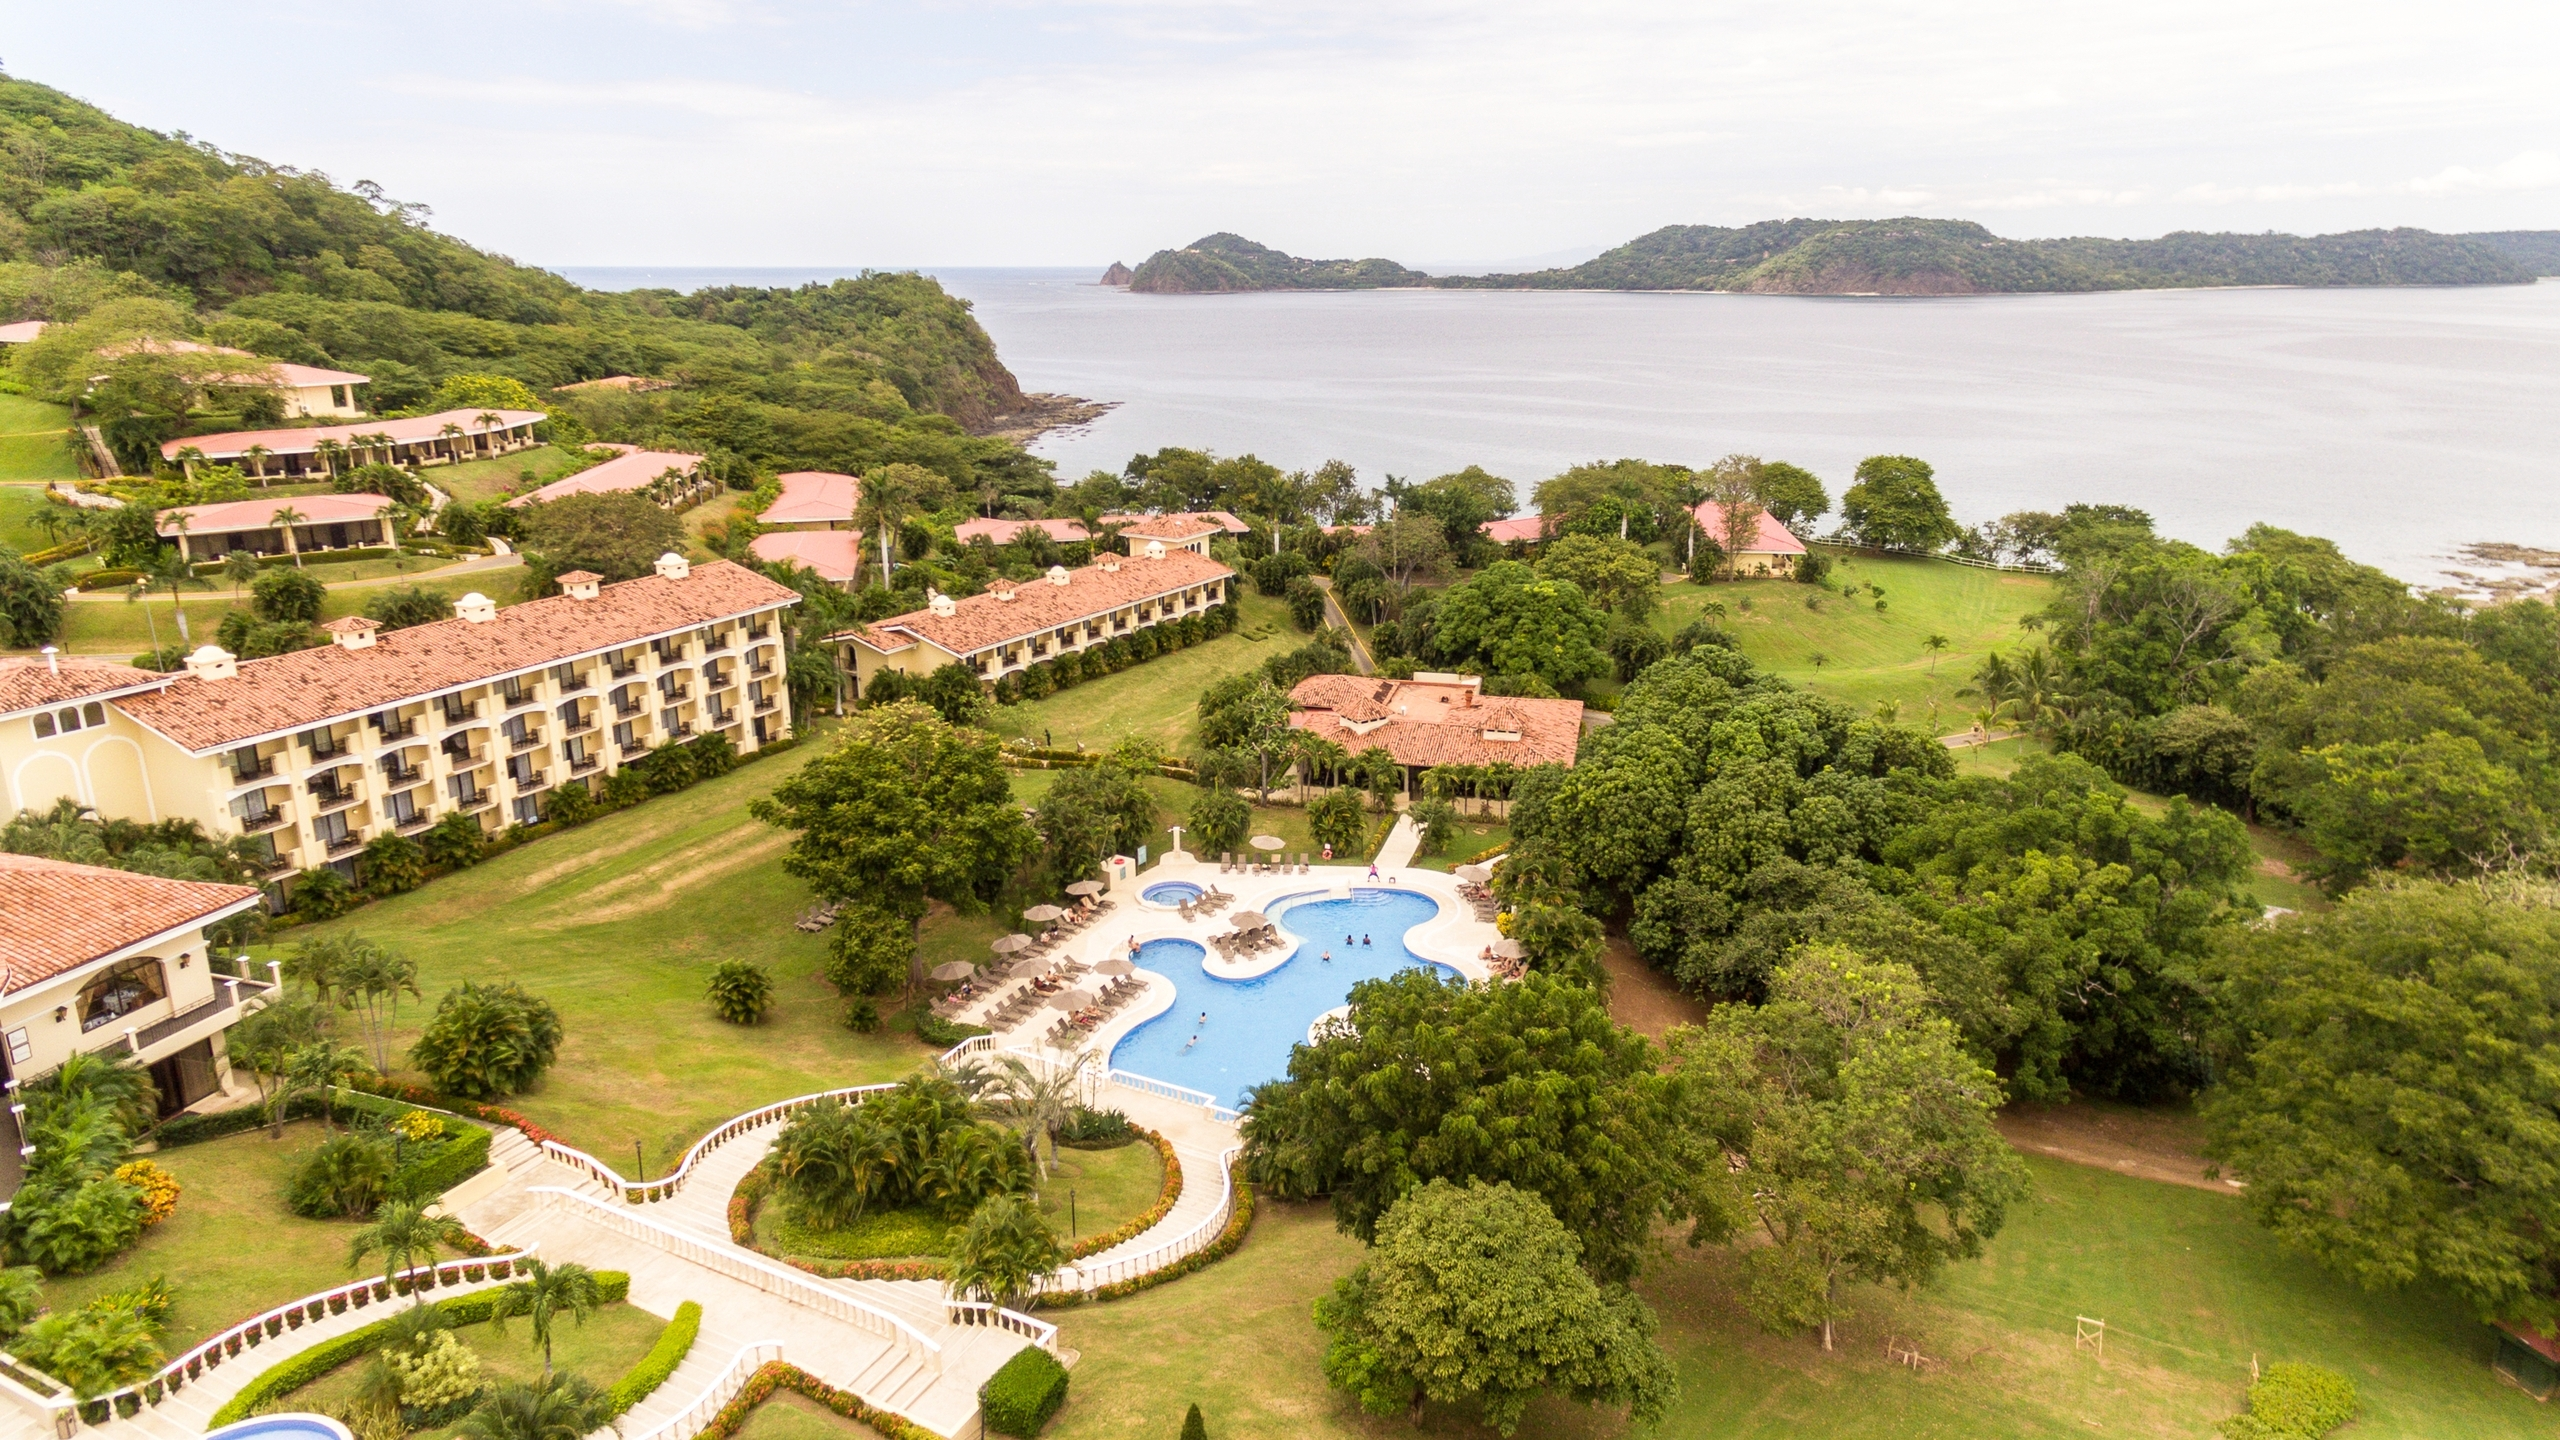 Get ready for an unforgettable adults-only resort escape at Occidental Grand Papagayo Resort, Costa Rica.